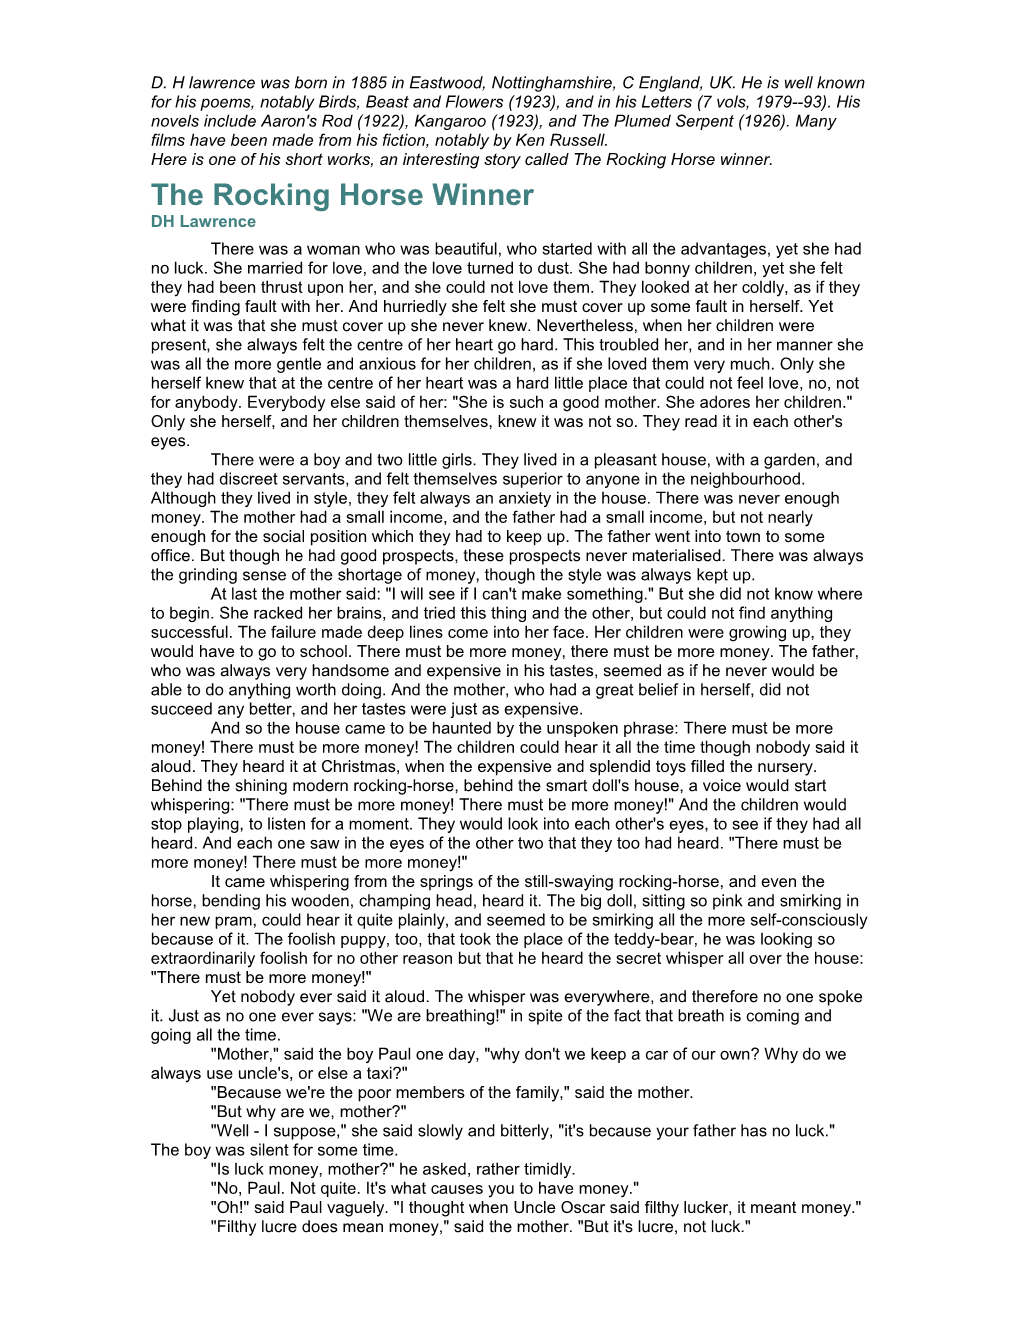 Here Is One of His Short Works, an Interesting Story Called the Rocking Horse Winner